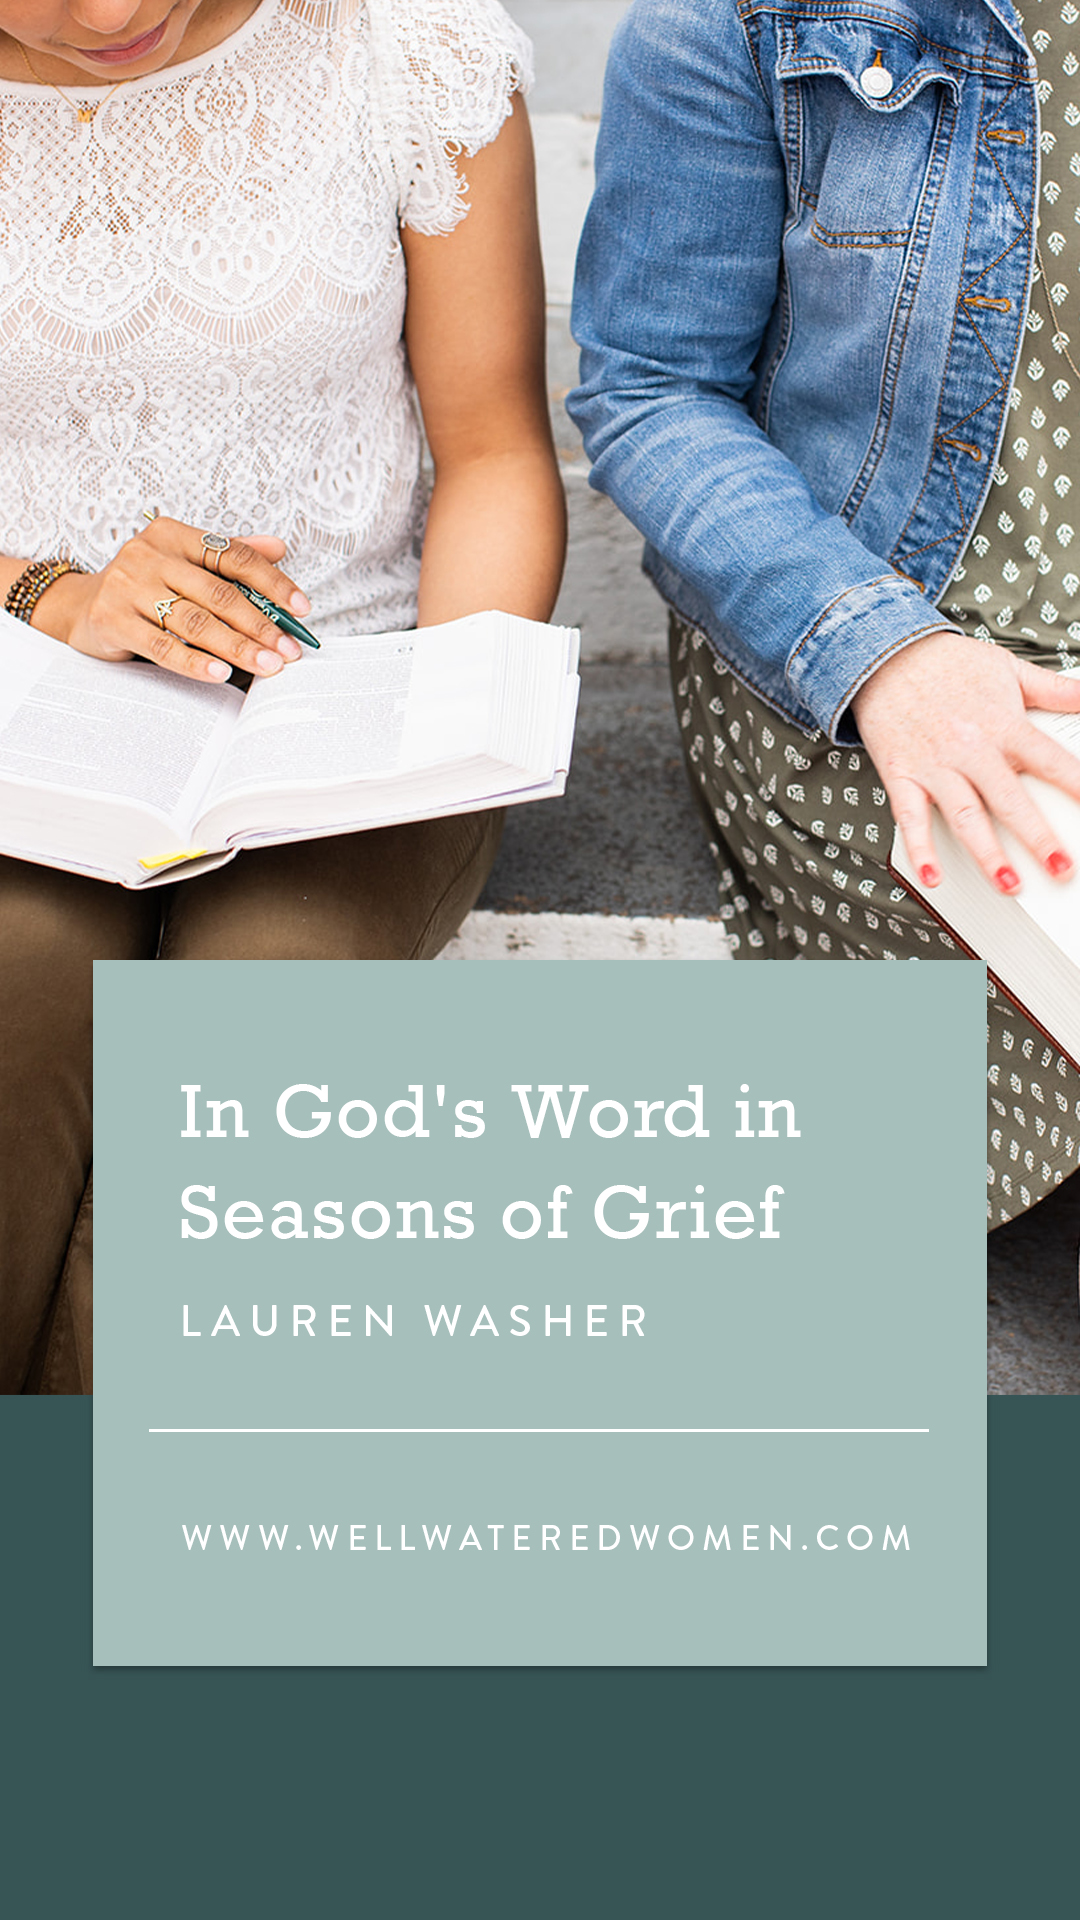 In God's Word In Seasons of Grief-an Article from Well-Watered Women